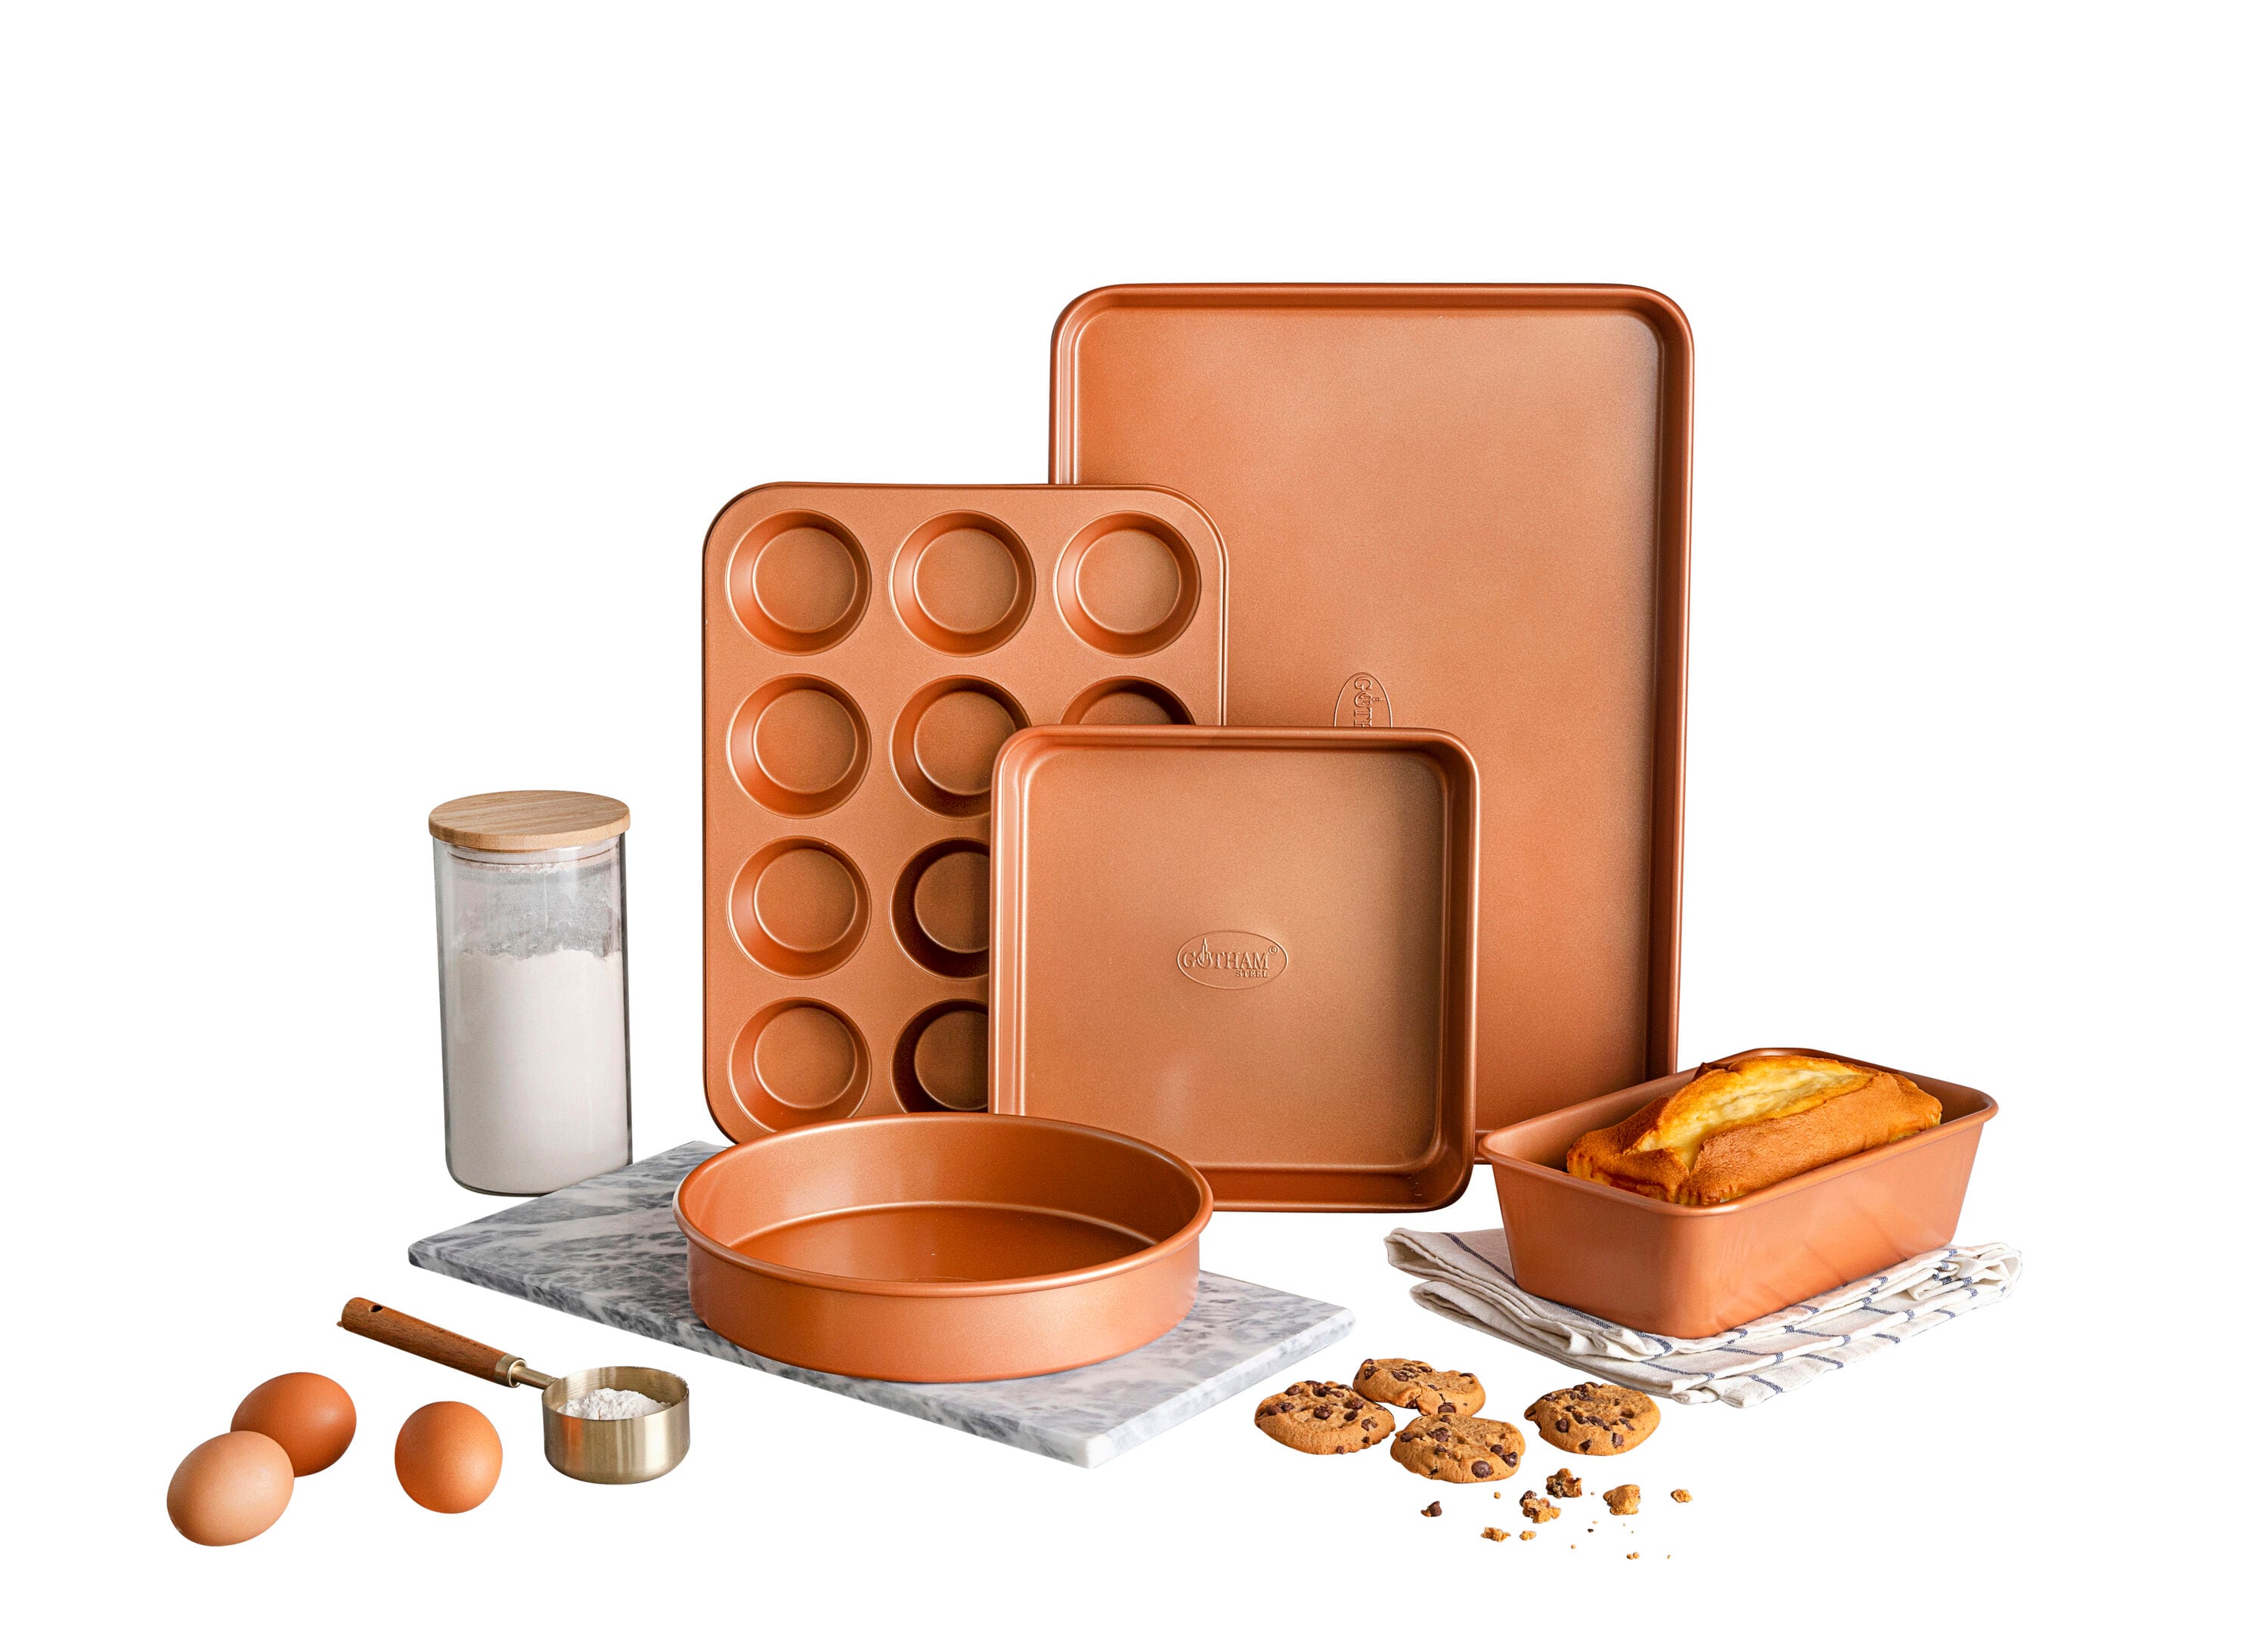 5pc Silicone Bakeware Set - Made by Design